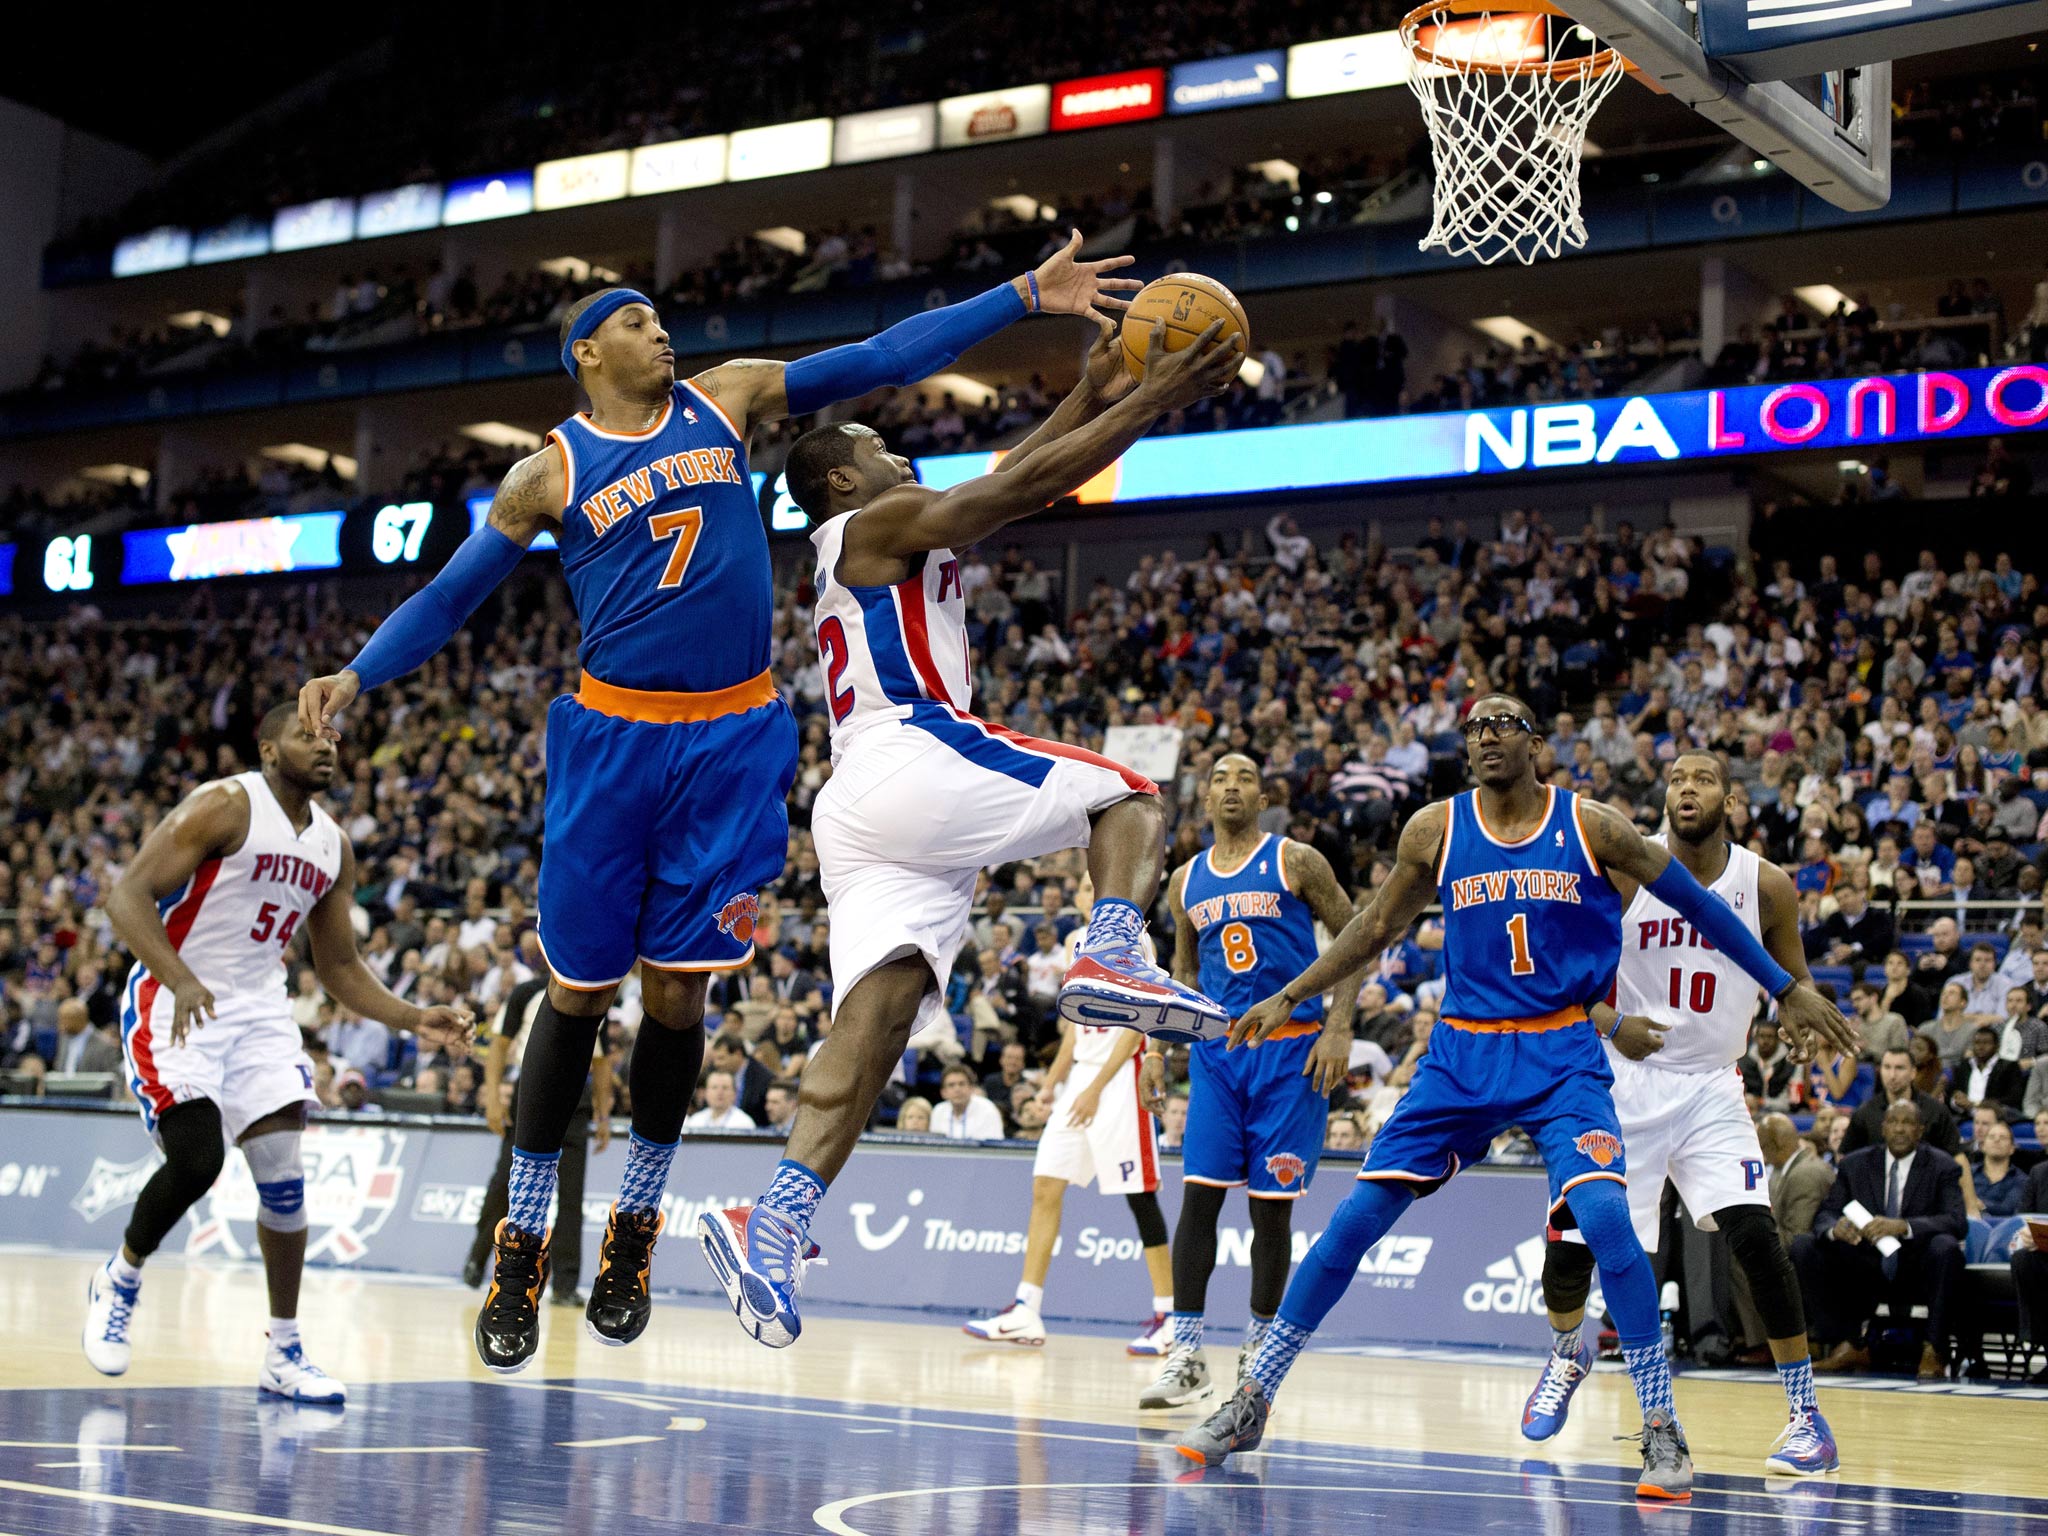 New York Knicks' forward Carmelo Anthony (2nd L) tries to block the ball as Detroit Pistons' guard Will Bynum (C) goes to the hoop